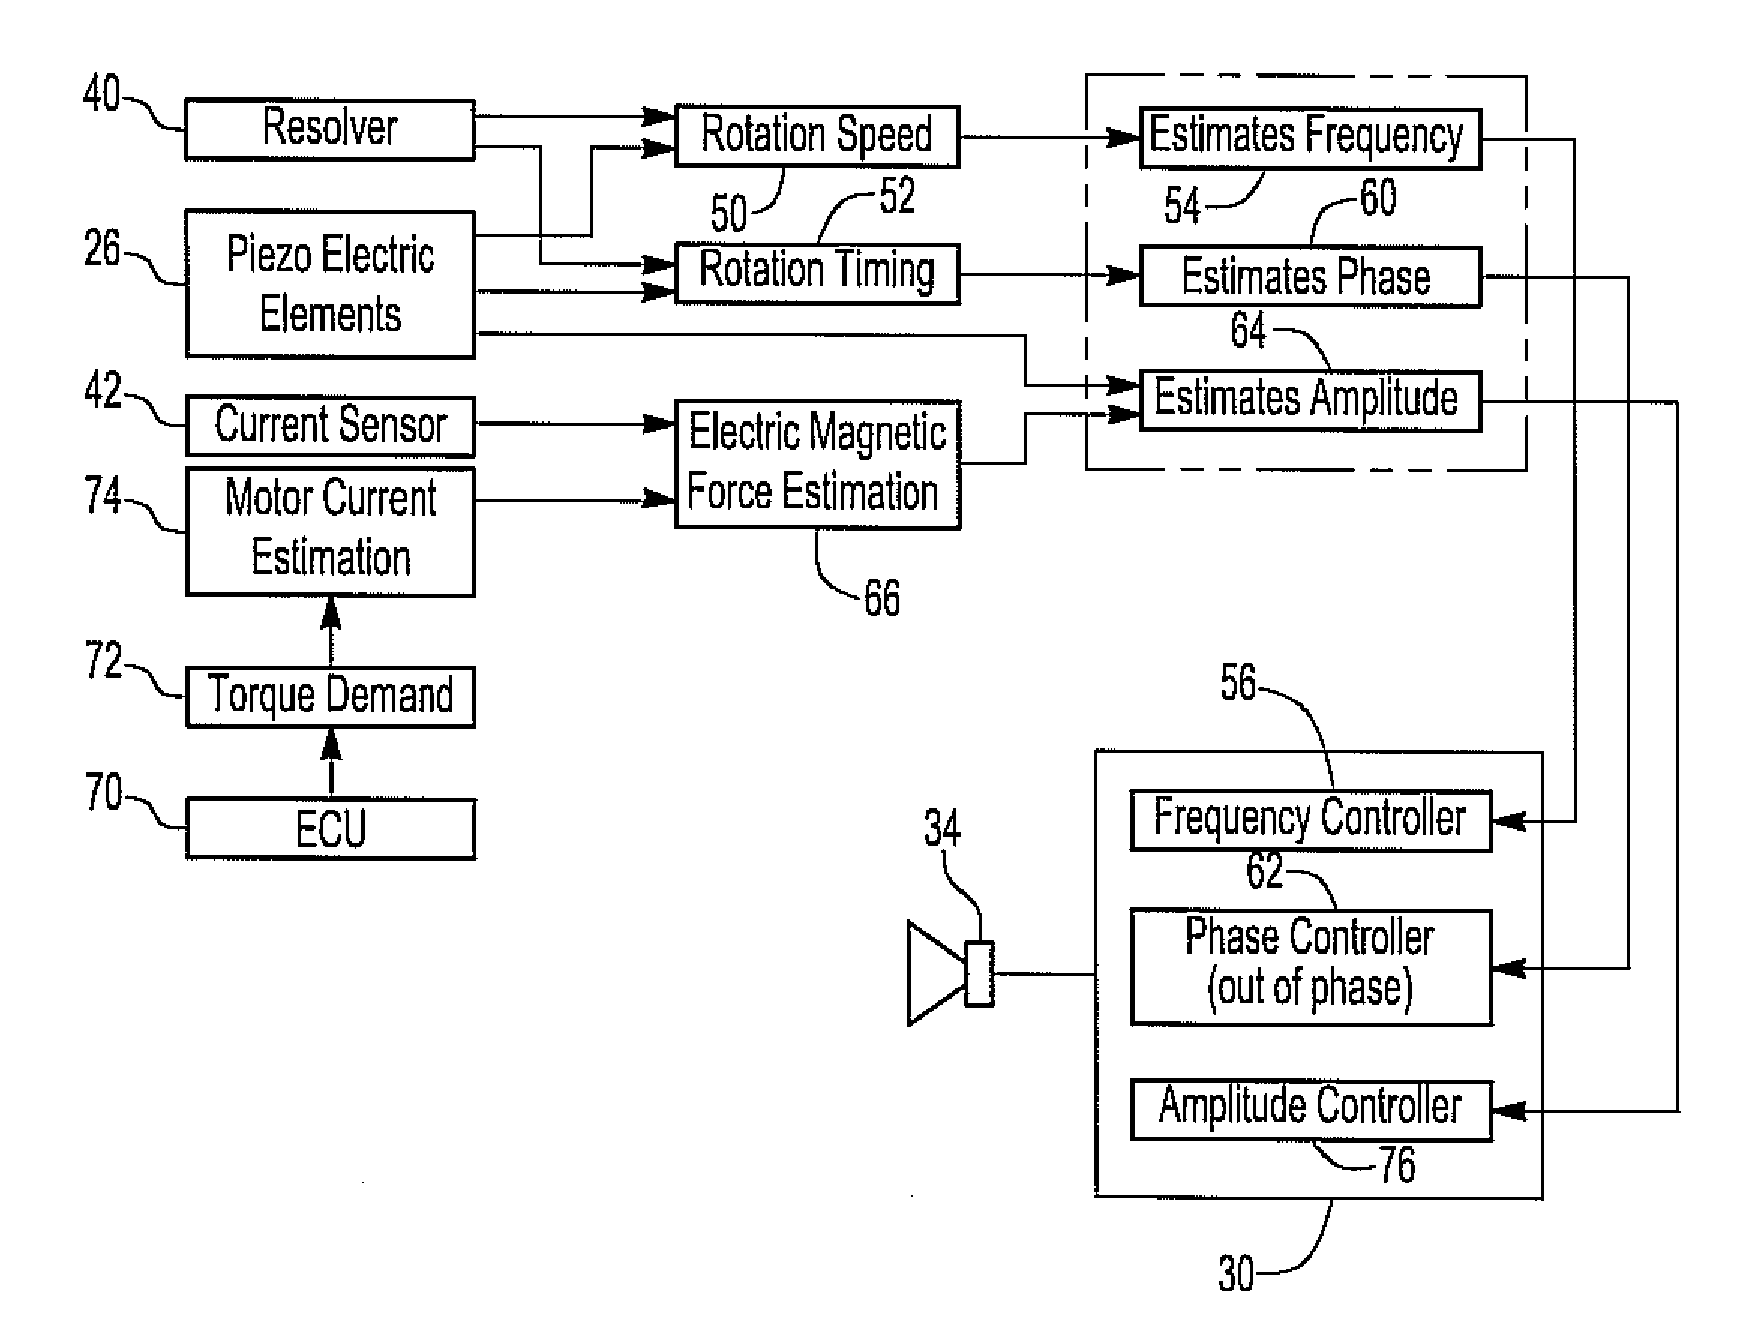 Noise reduction system for an electrically poered automotive vehicle